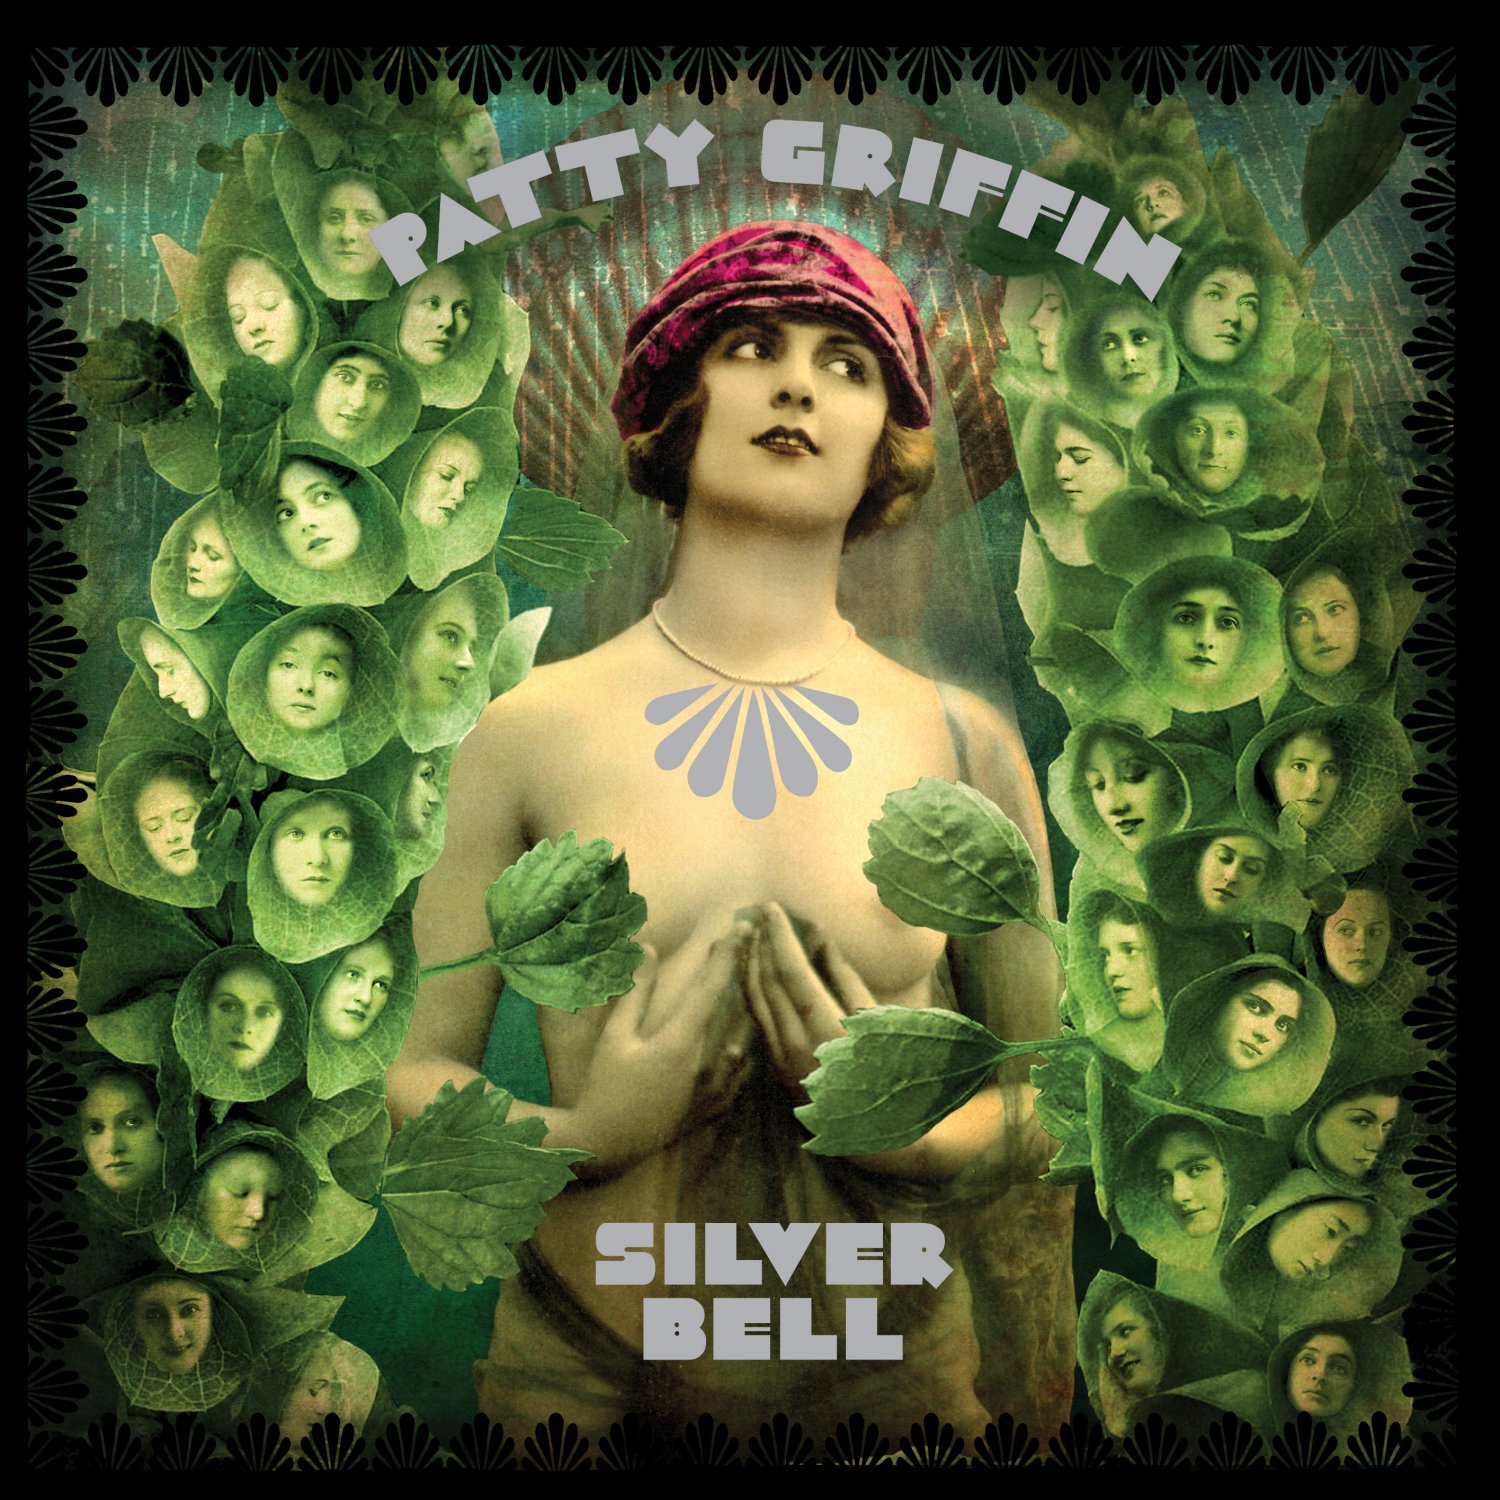 Patty Griffin – “Silver Bell” Review